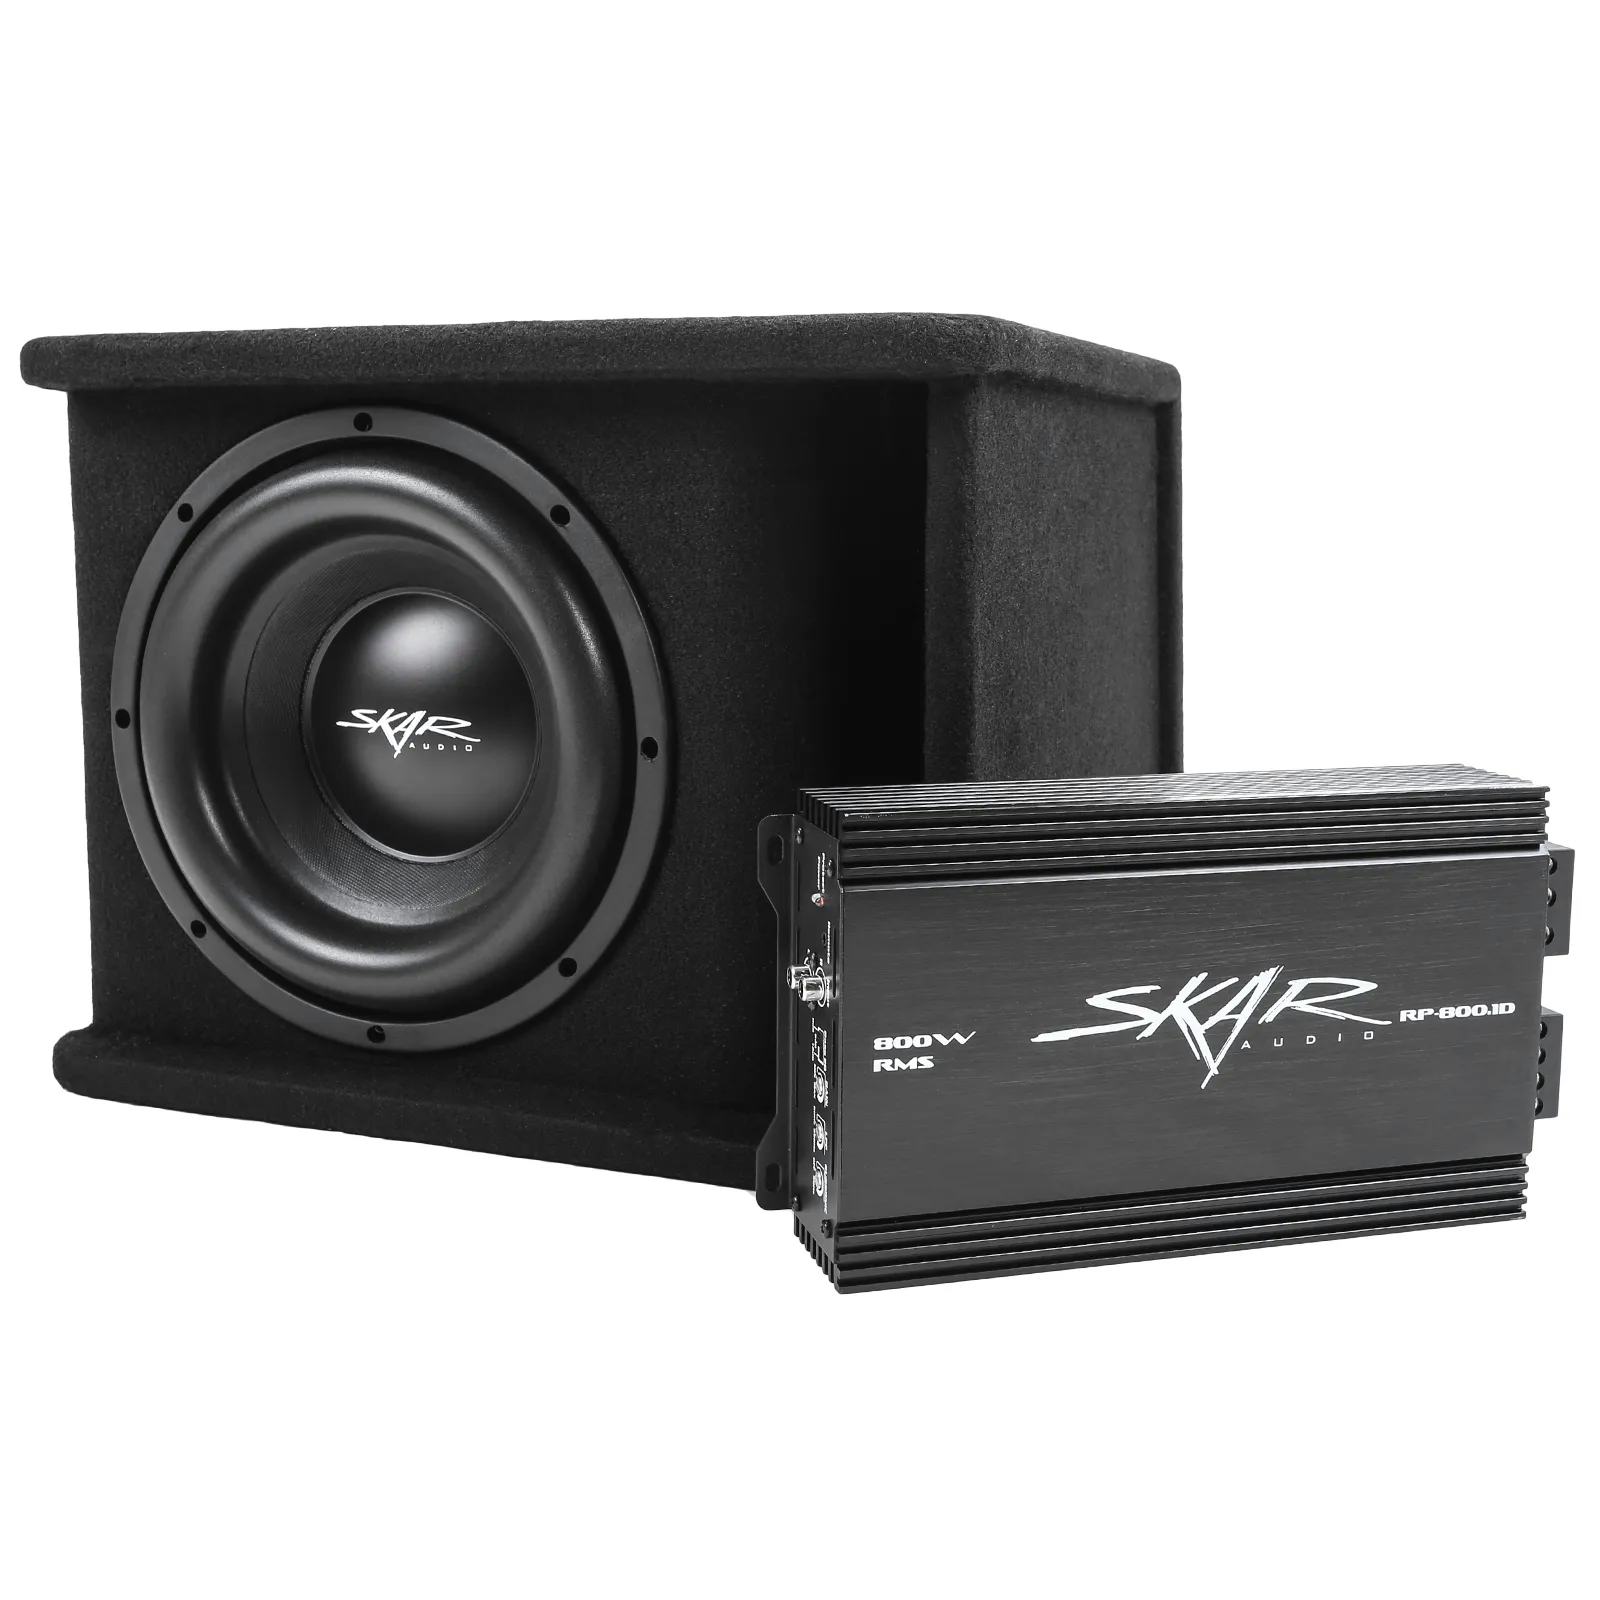 Single 10" 1,200 Watt SDR Series Complete Subwoofer Package with Vented Enclosure and Amplifier #2